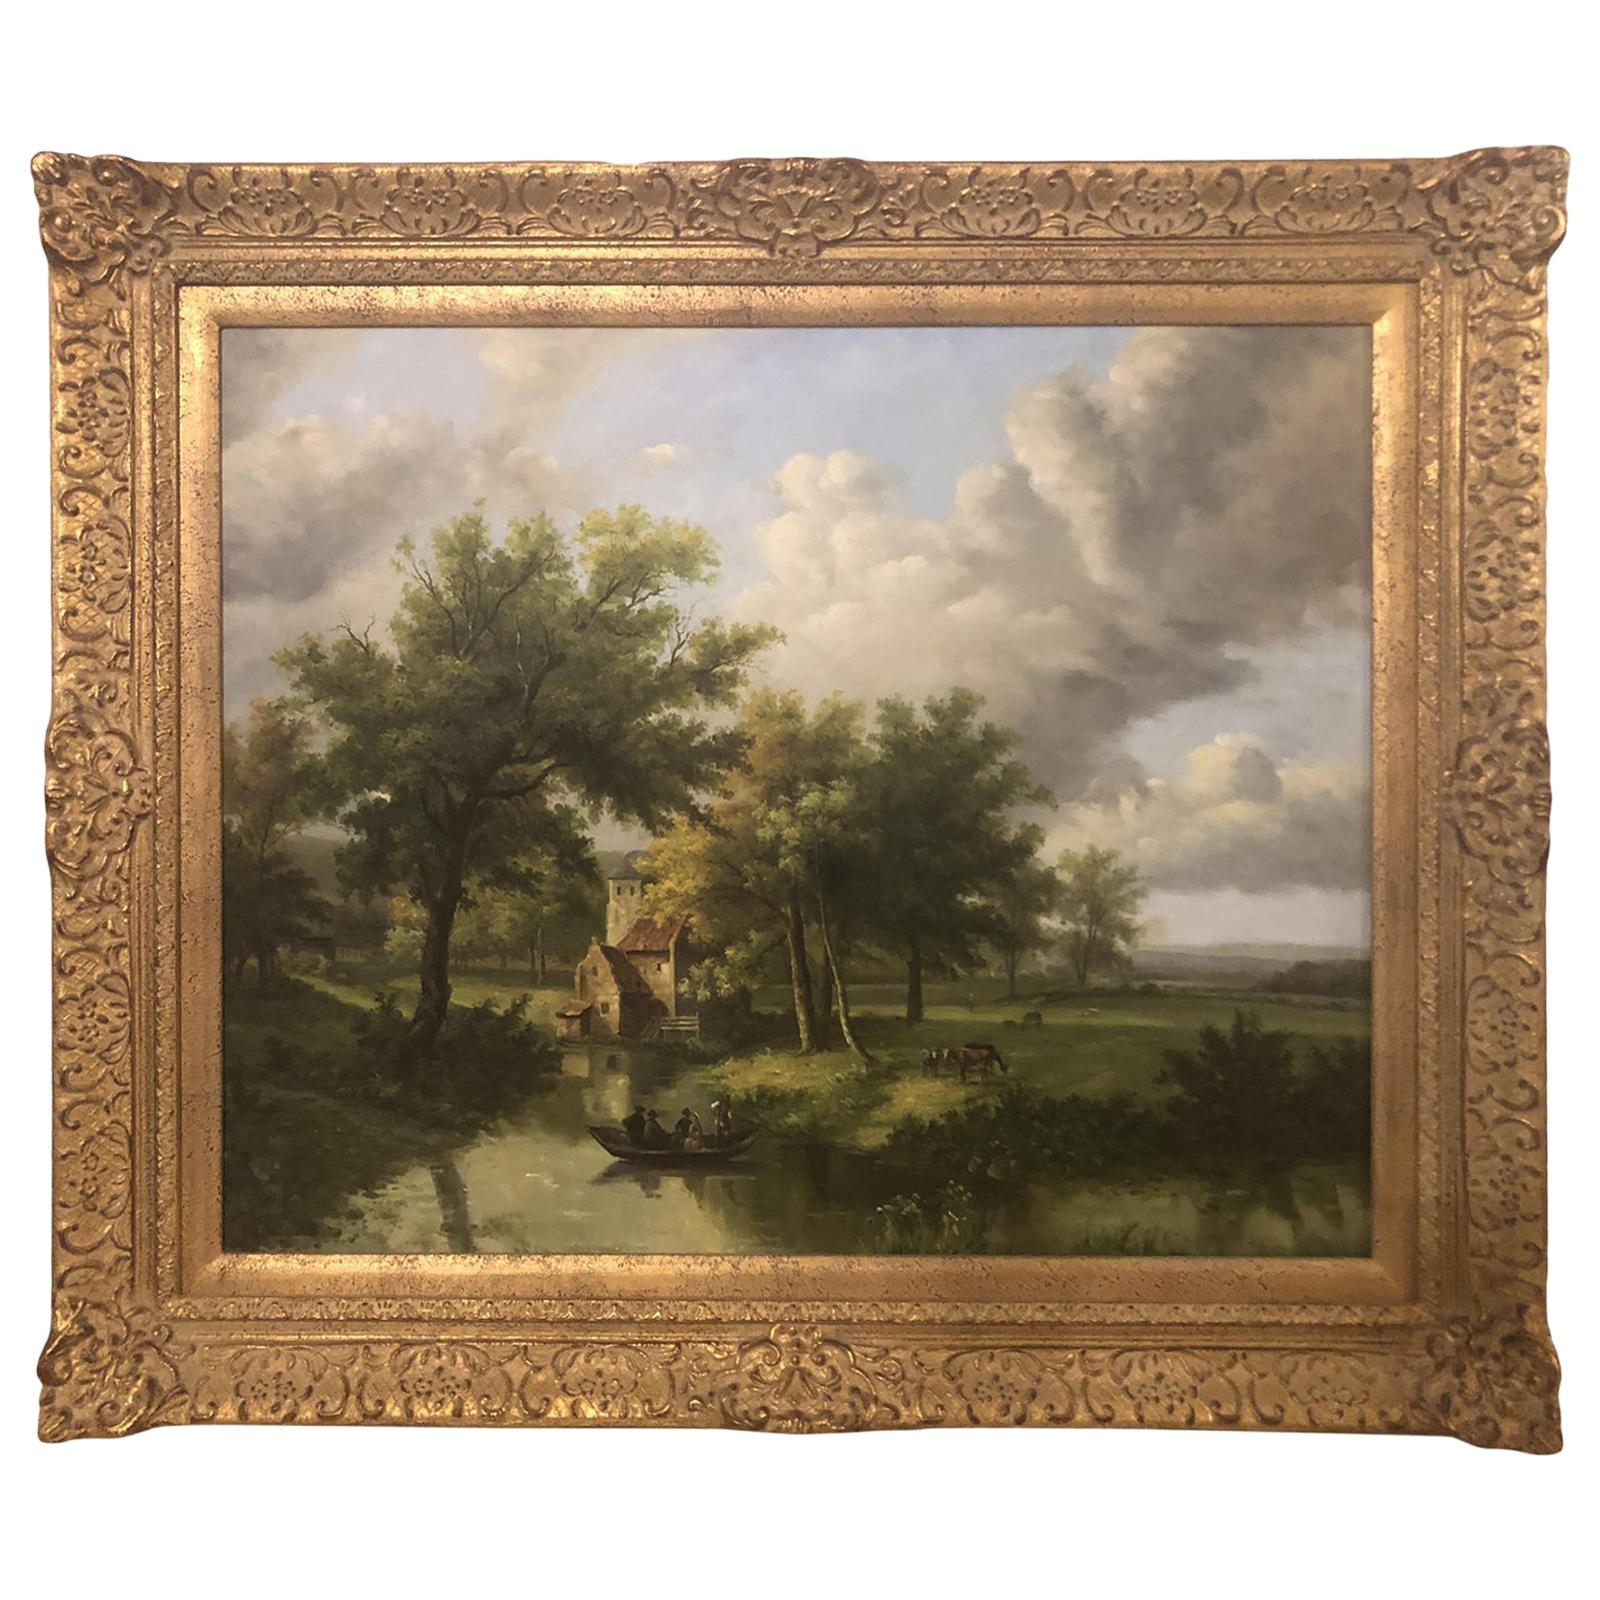 Oil on Canvas Landscape Painting, Signed by N.Bingham